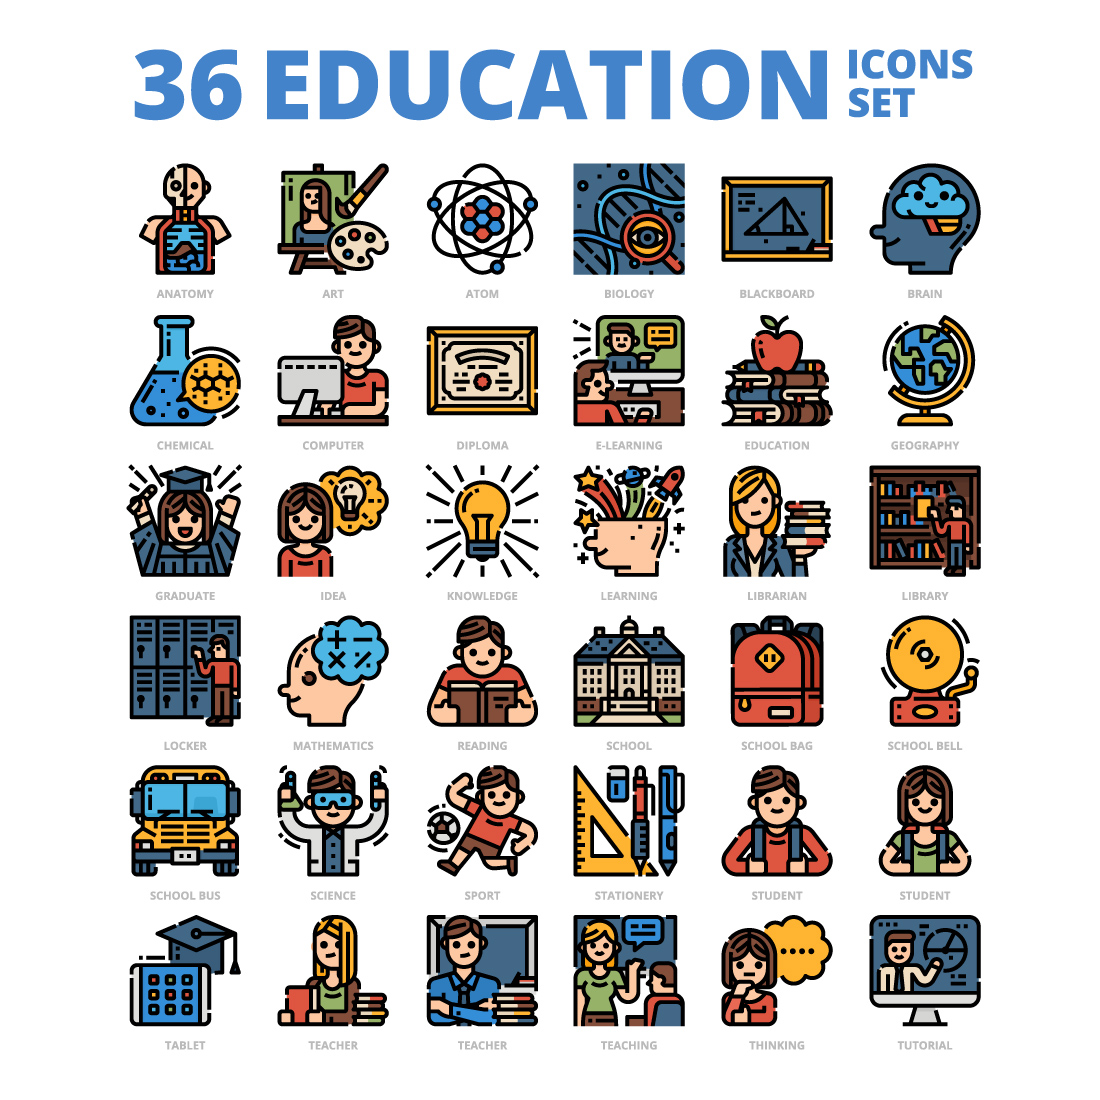 36 Education Icons Set x 4 Styles cover image.